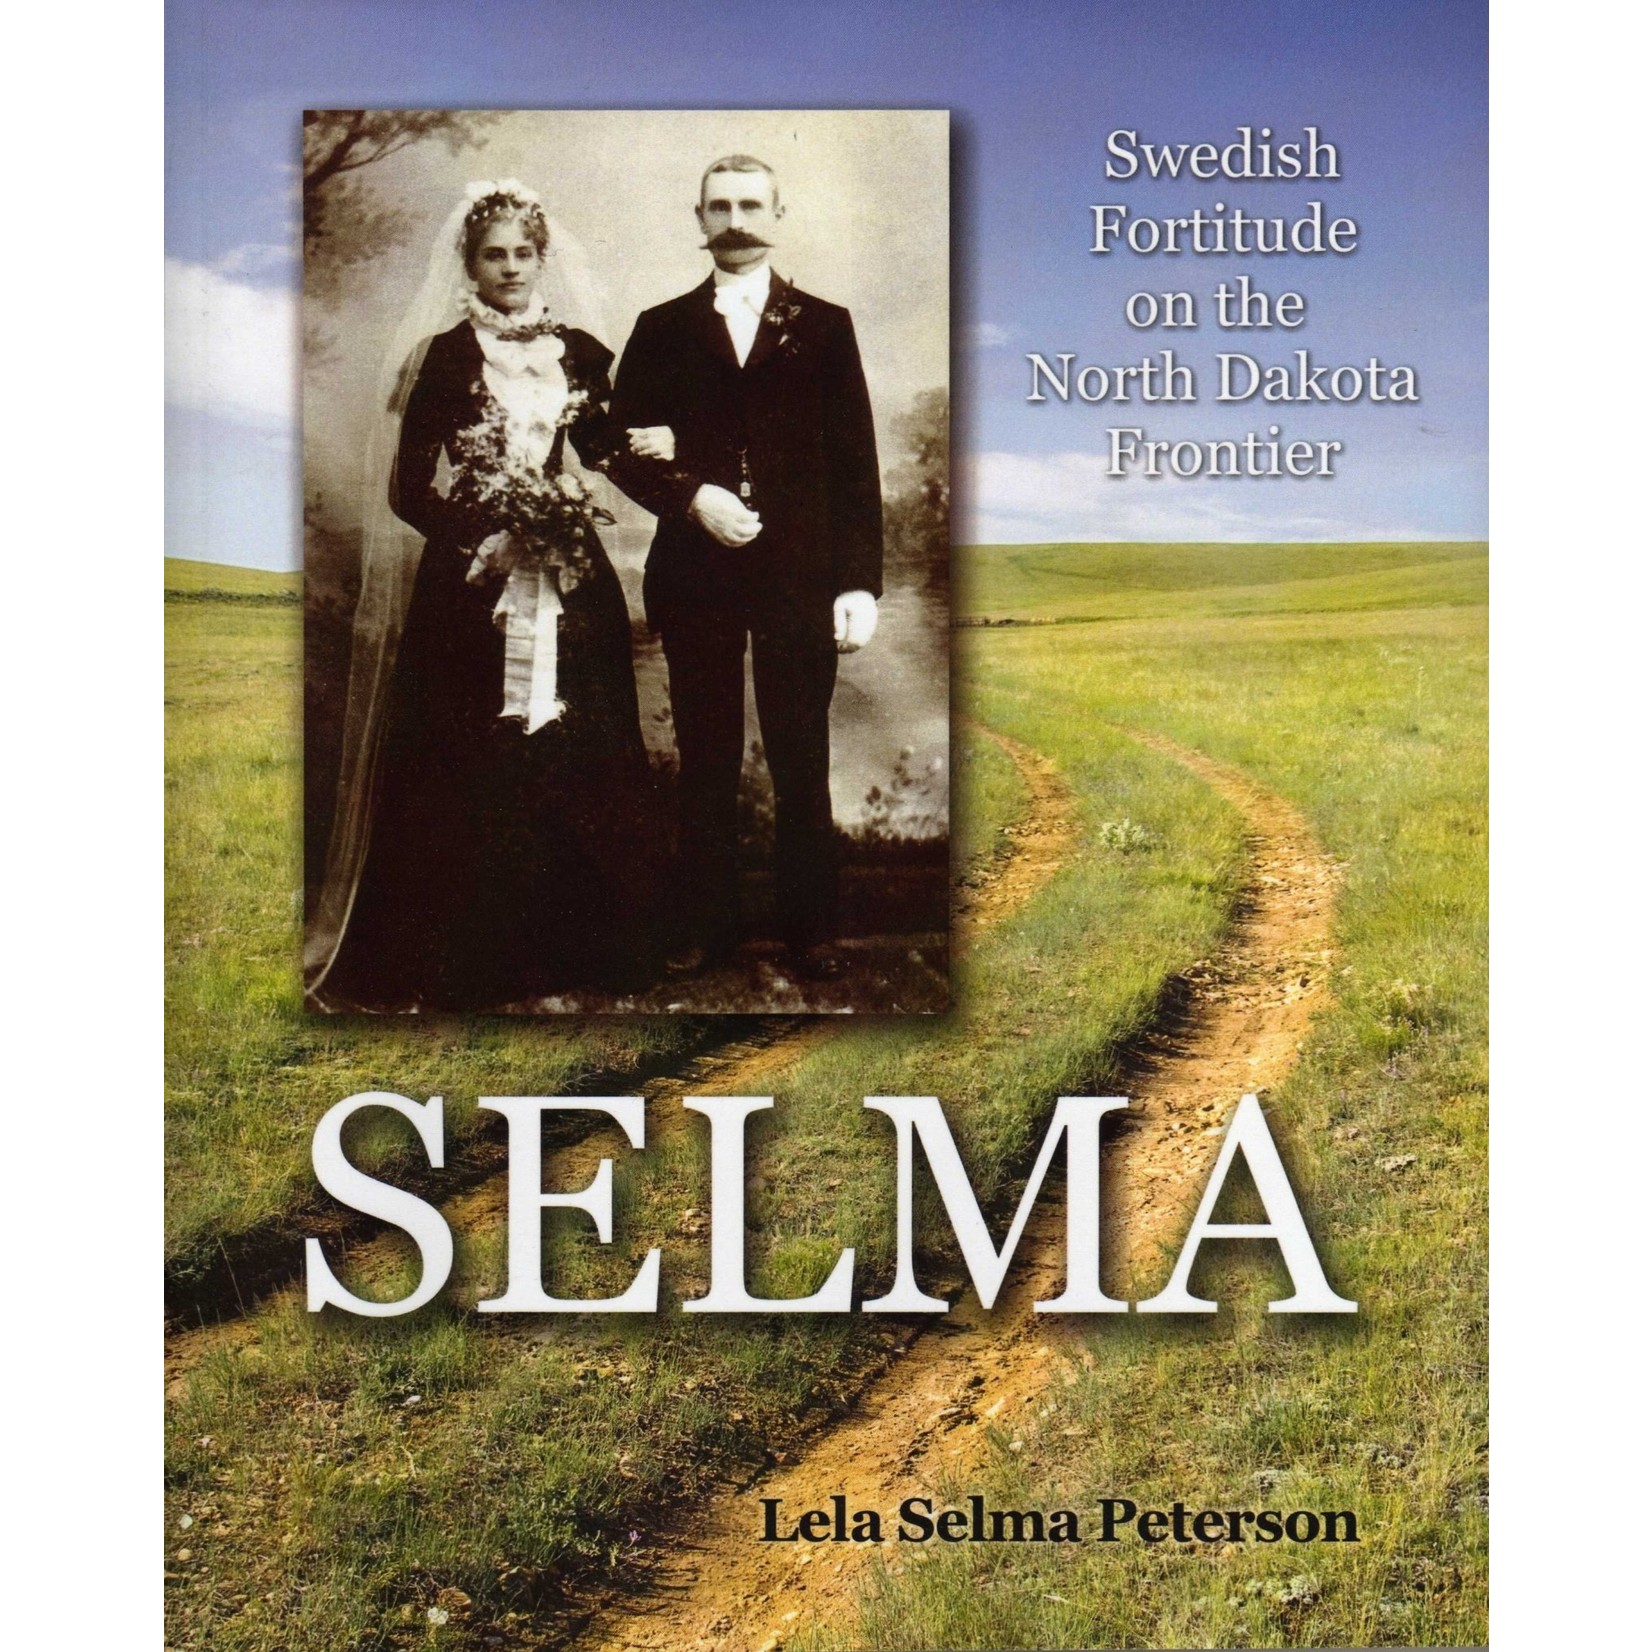 Selma: Swedish Fortitude on the ND Frontier